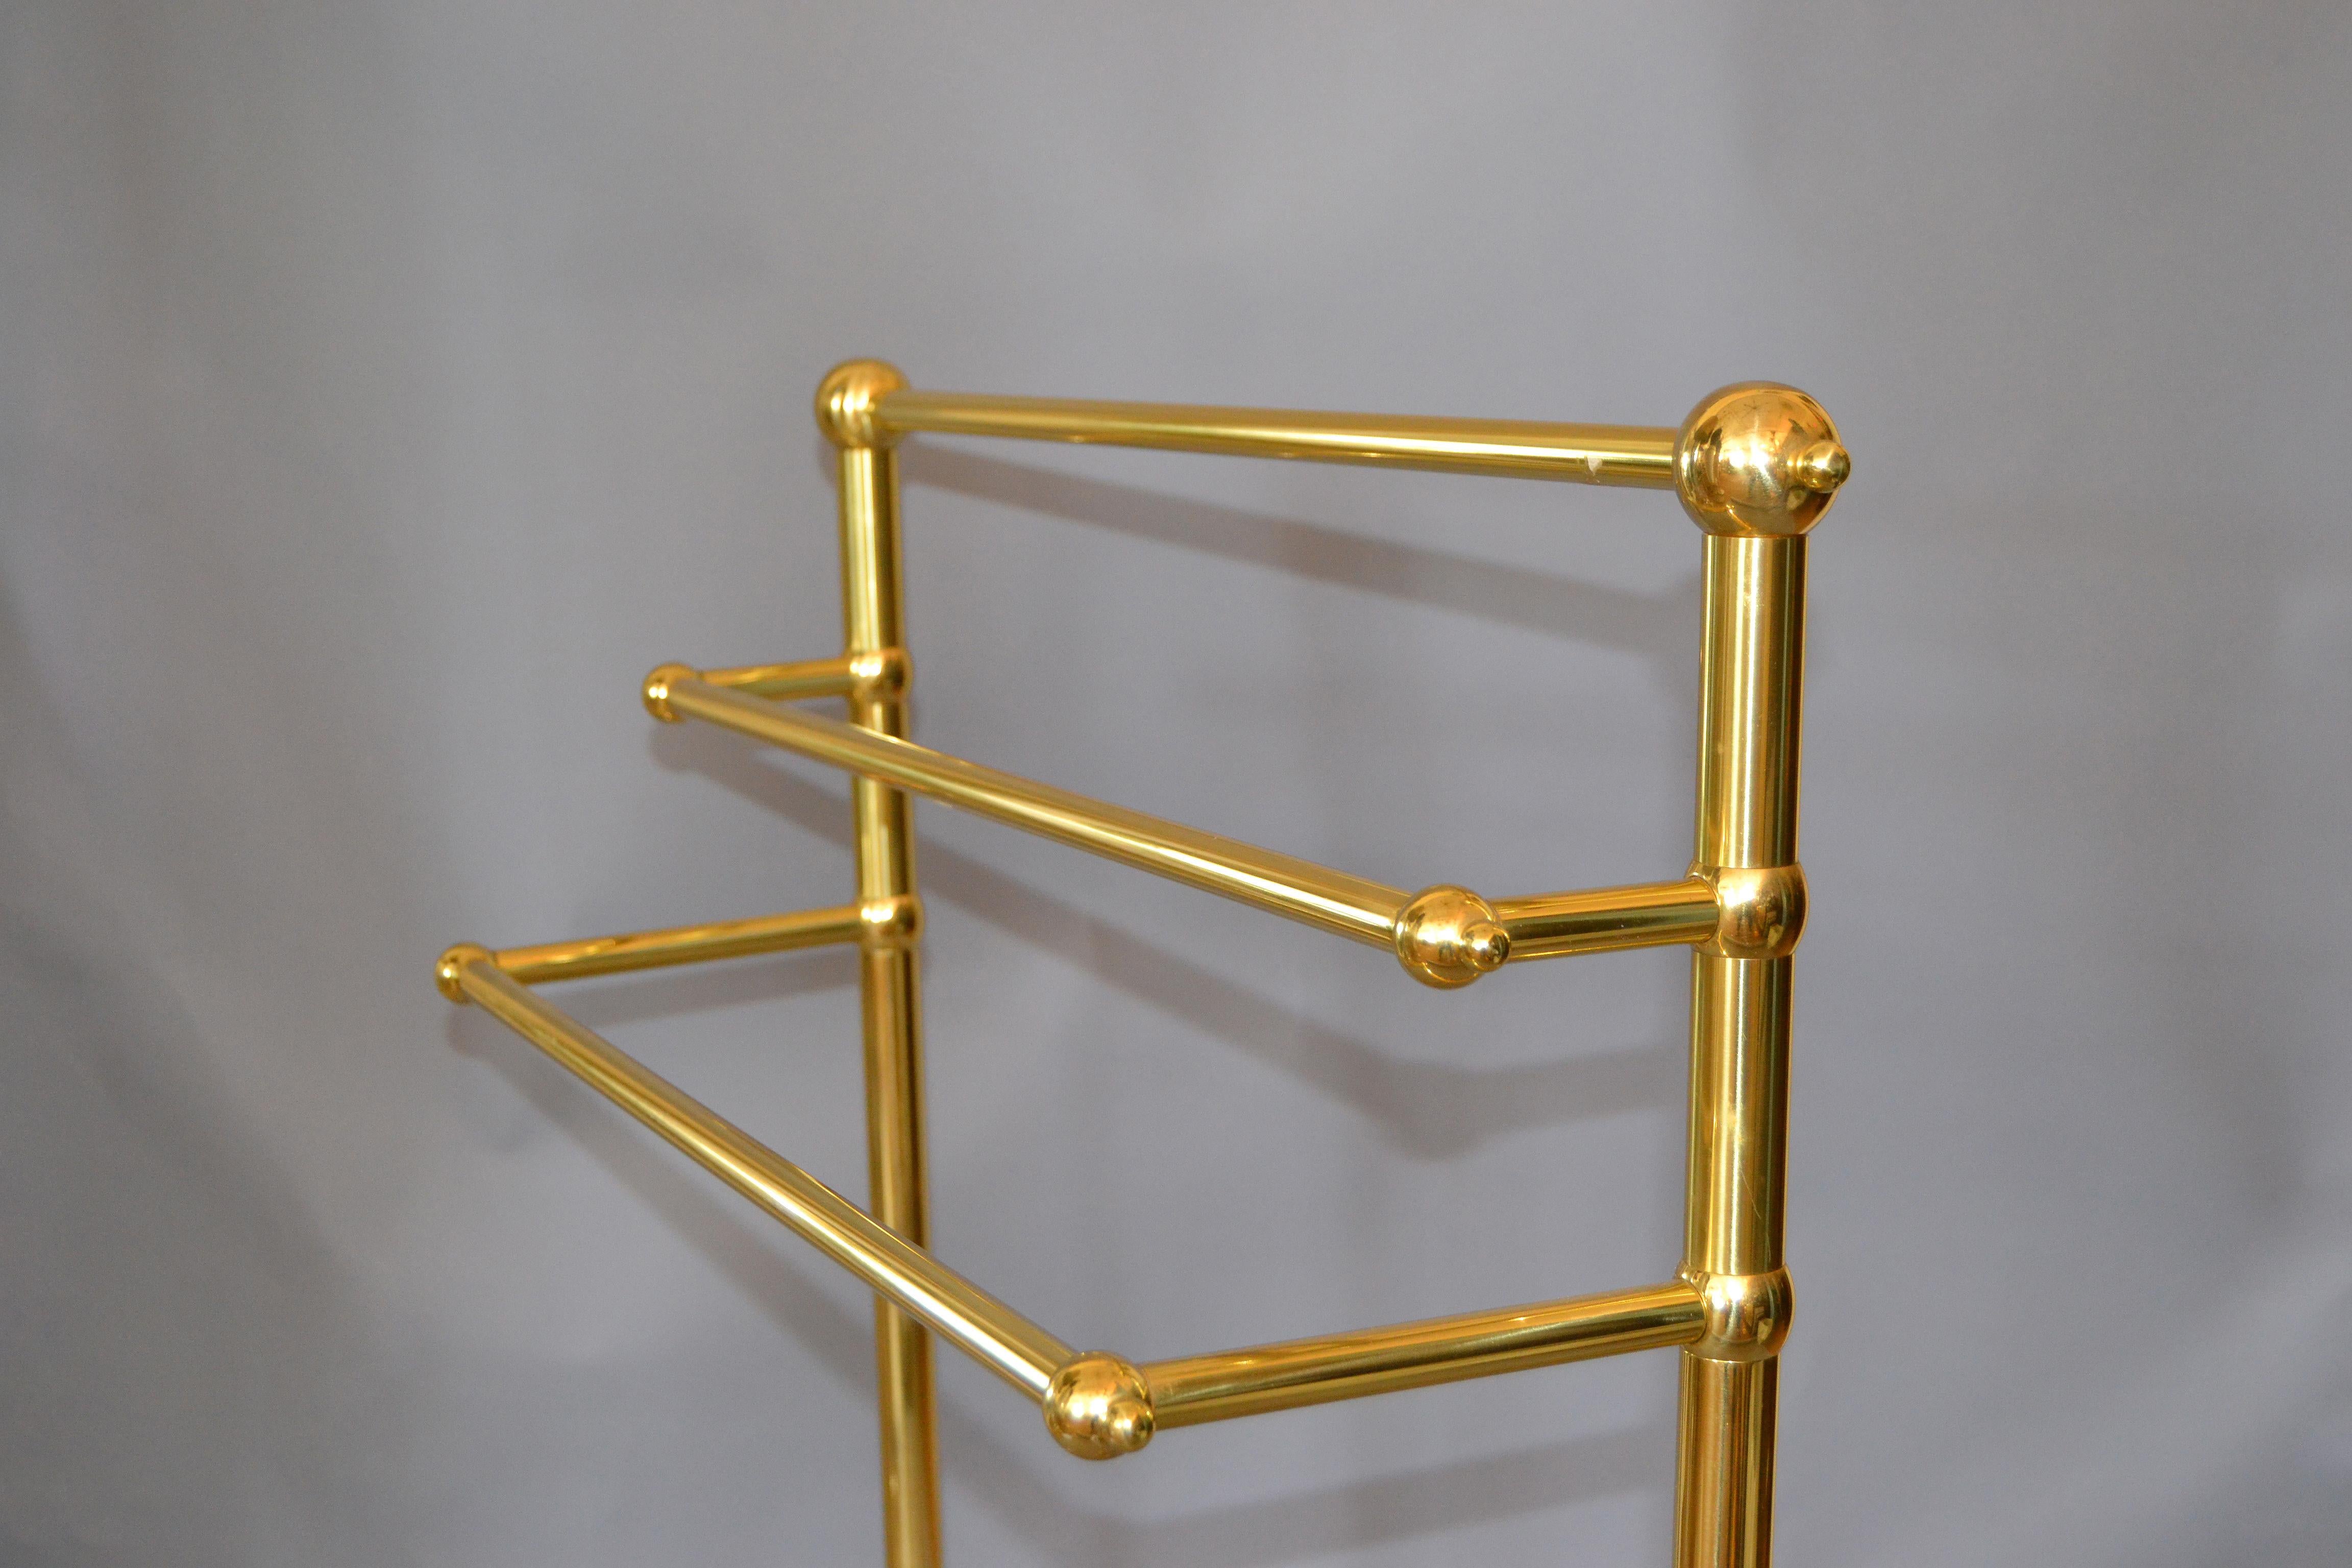 Three-tier Mid-Century Modern brass pedestal rack, stand for towels or bedspreads.
Marked England underneath.
The brass finish will be polished prior shipping and is durable for years to come.
 